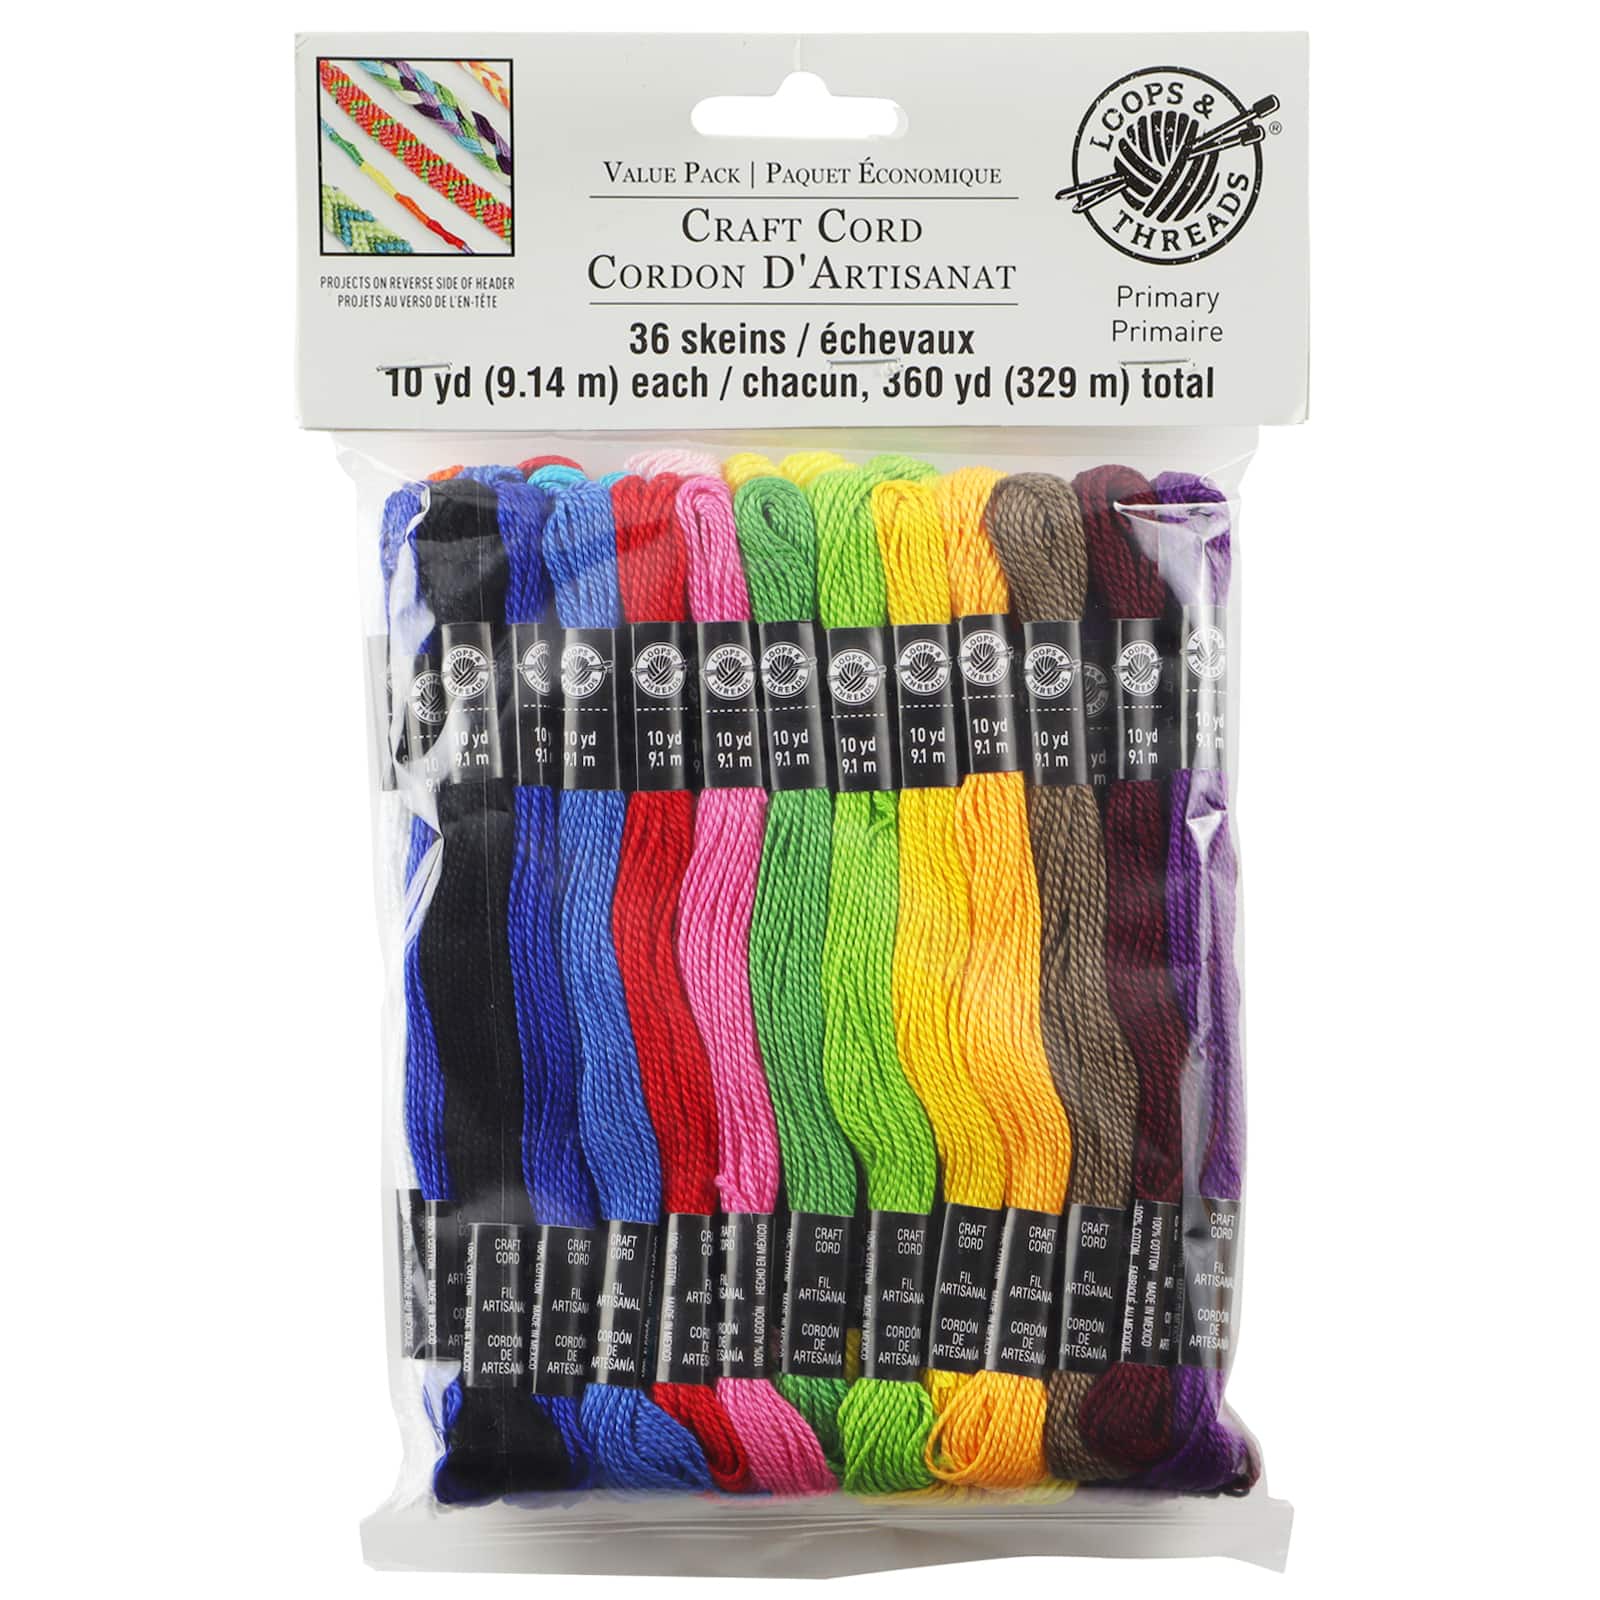 Primary Craft Cord by Loops & Threads™, 36ct.